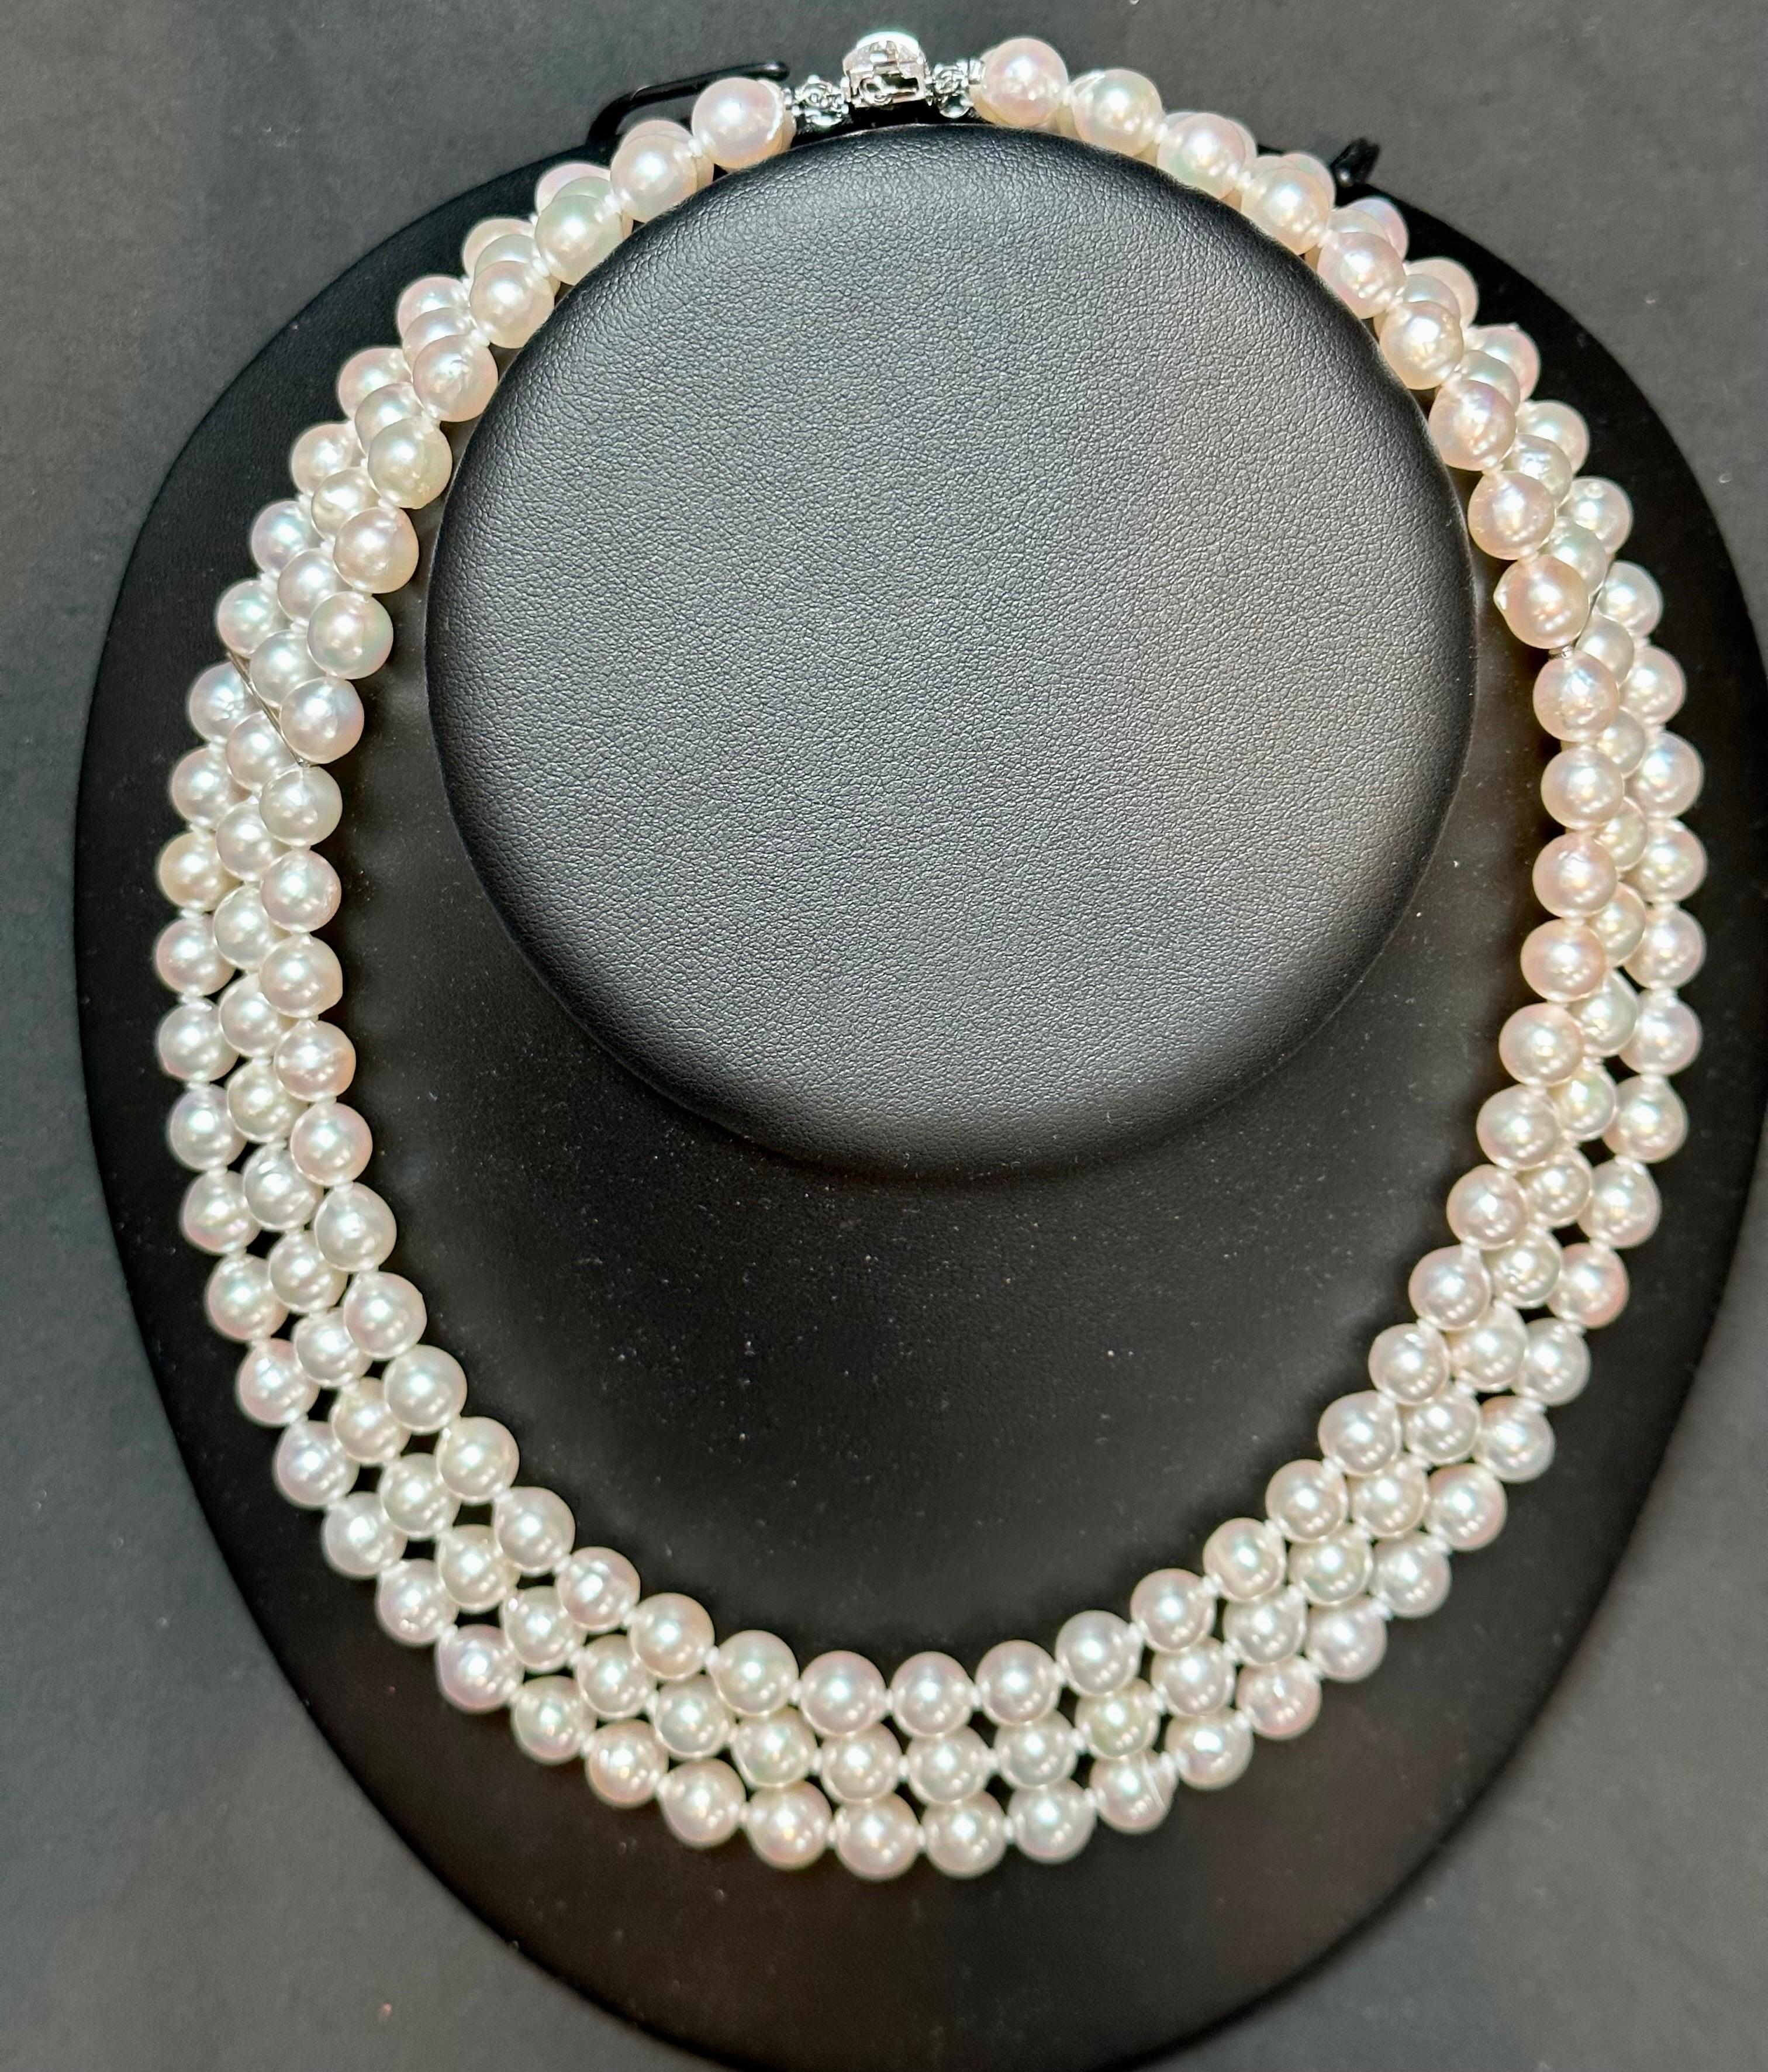 Introducing the 8mm Akoya Japan Pearl Triple Strand choker Necklace, complete with a Sterling Silver clasp. This exquisite Pearl necklace boasts three rows of stunning Japanese Akoya pearls, each measuring approximately 7.8 to 8 mm in size. The